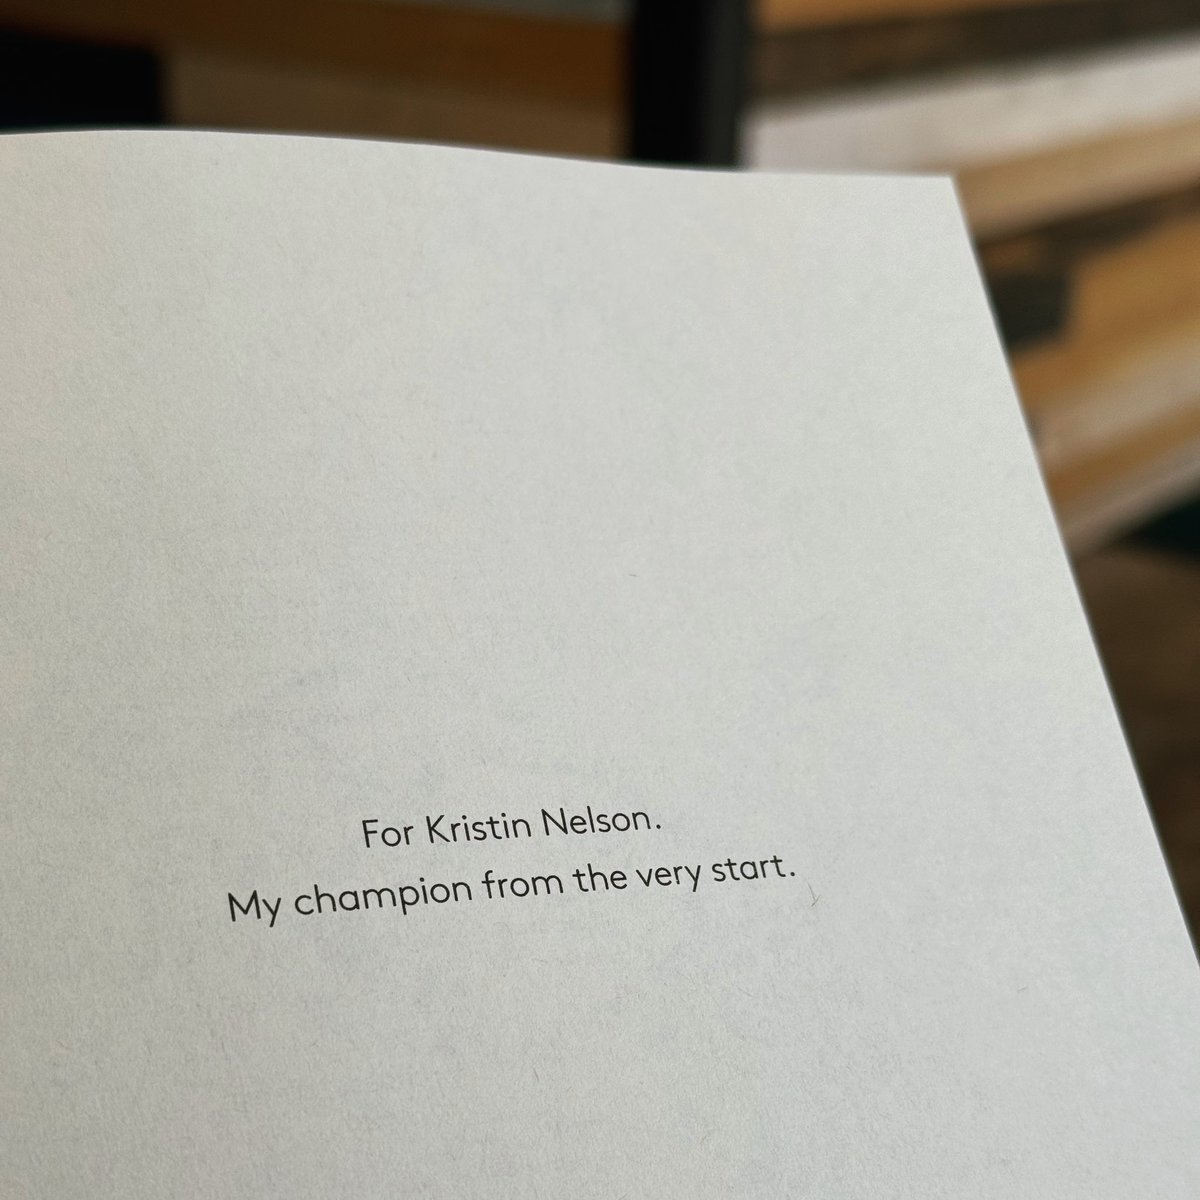 I take my dedications very seriously. They’re just such a wonderful way to honor someone you care about, and A Whisper in the Walls is for @agentkristinNLA because she’s been with me from the very start. Always championing. Always believing. Cheers to number 12, Kristin!